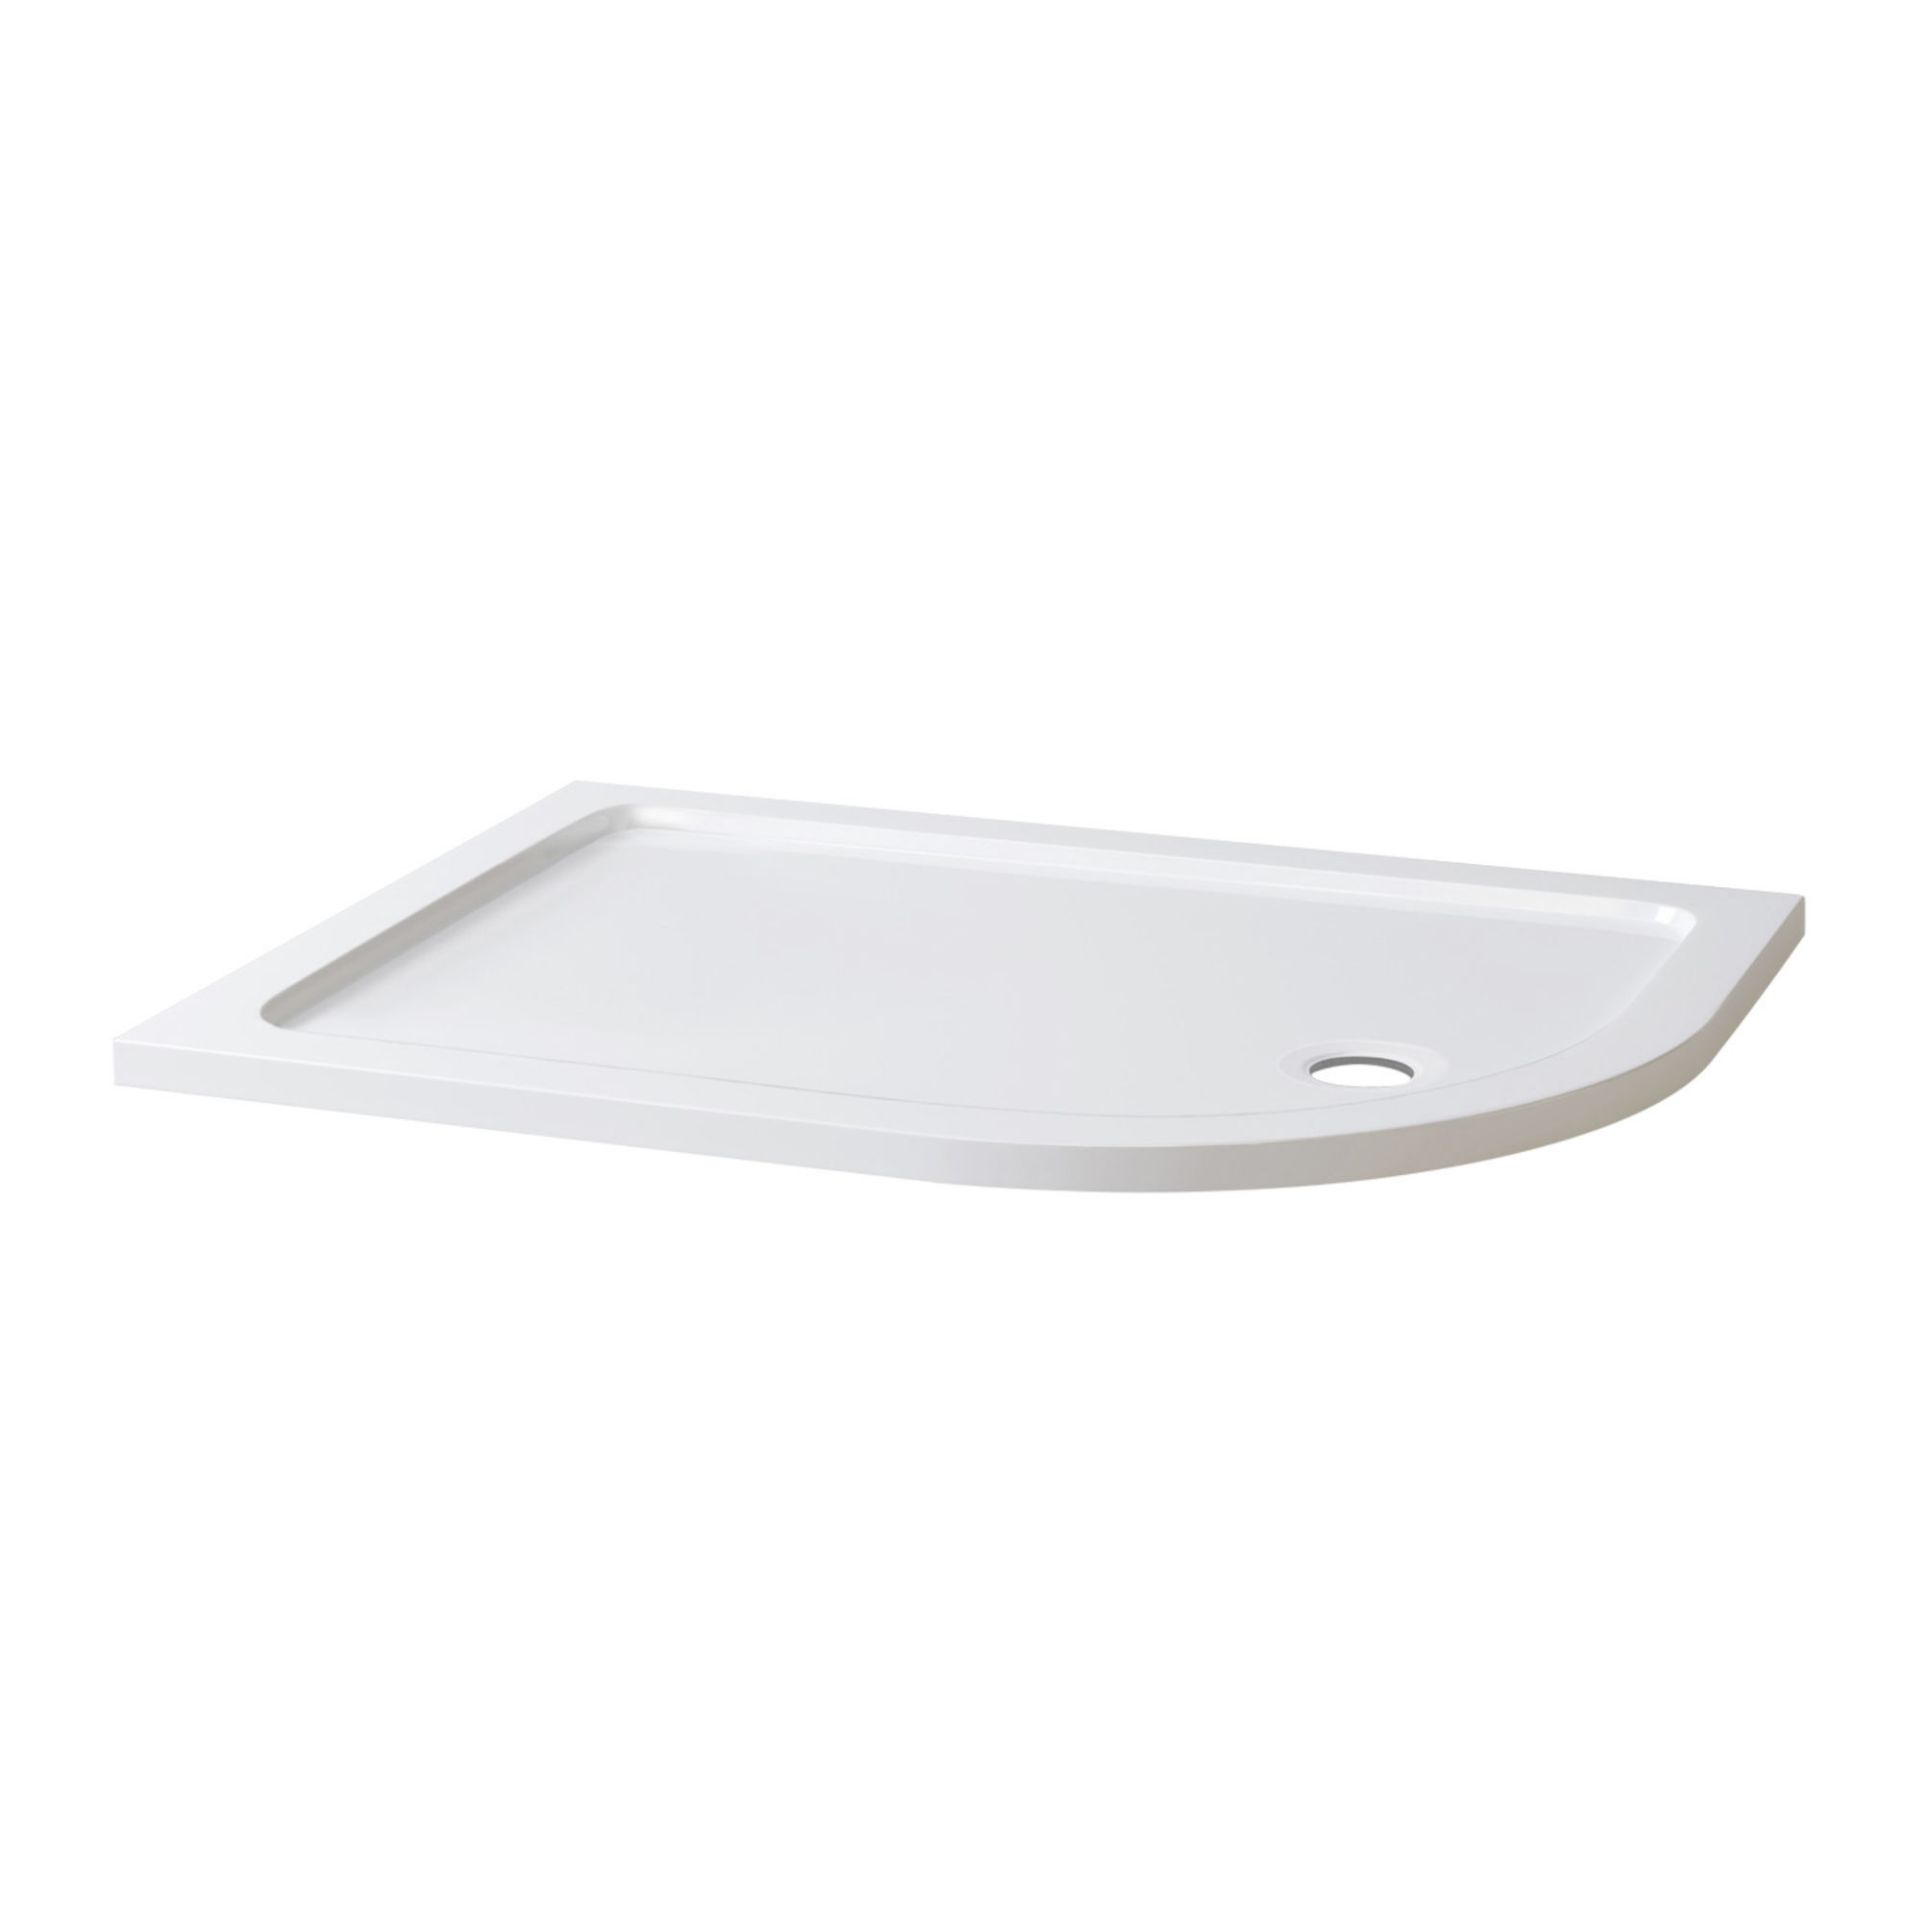 (AD54) 1200x900mm Offset Quadrant Ultra Slim Stone Shower Tray - Right. RRP £234.99. Low - Image 4 of 4